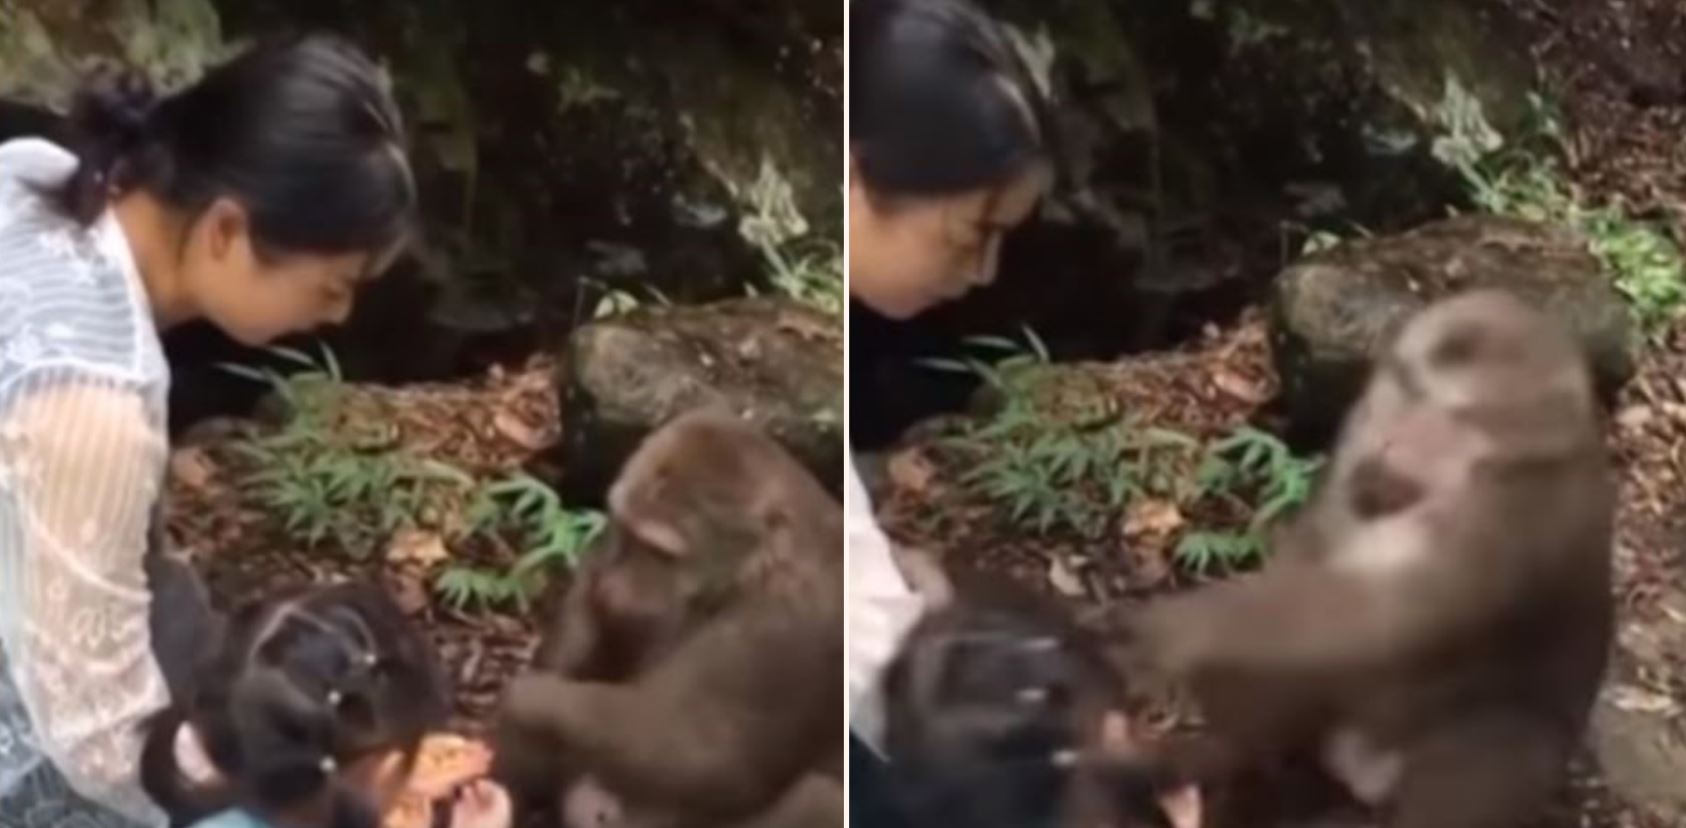 Monkey punches girl in the face at zoo after taunting him